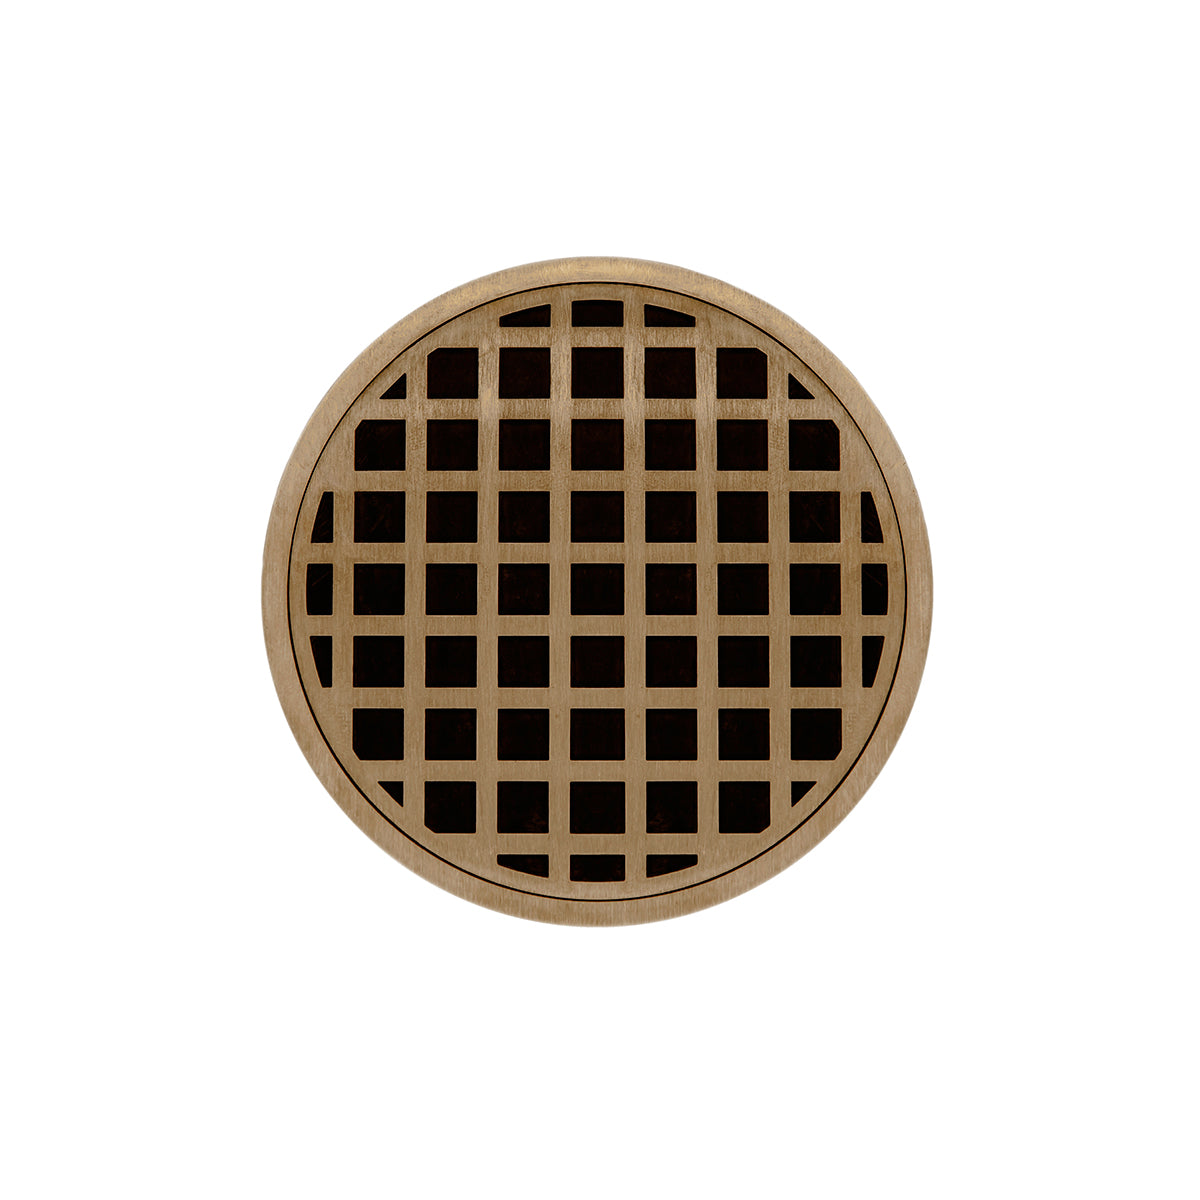 Infinity Drain 5" Round RQDB 5 Premium Center Drain Kit with Squares Pattern Decorative Plate with ABS Bonded Flange Drain Body, 2", 3" and 4" Outlet